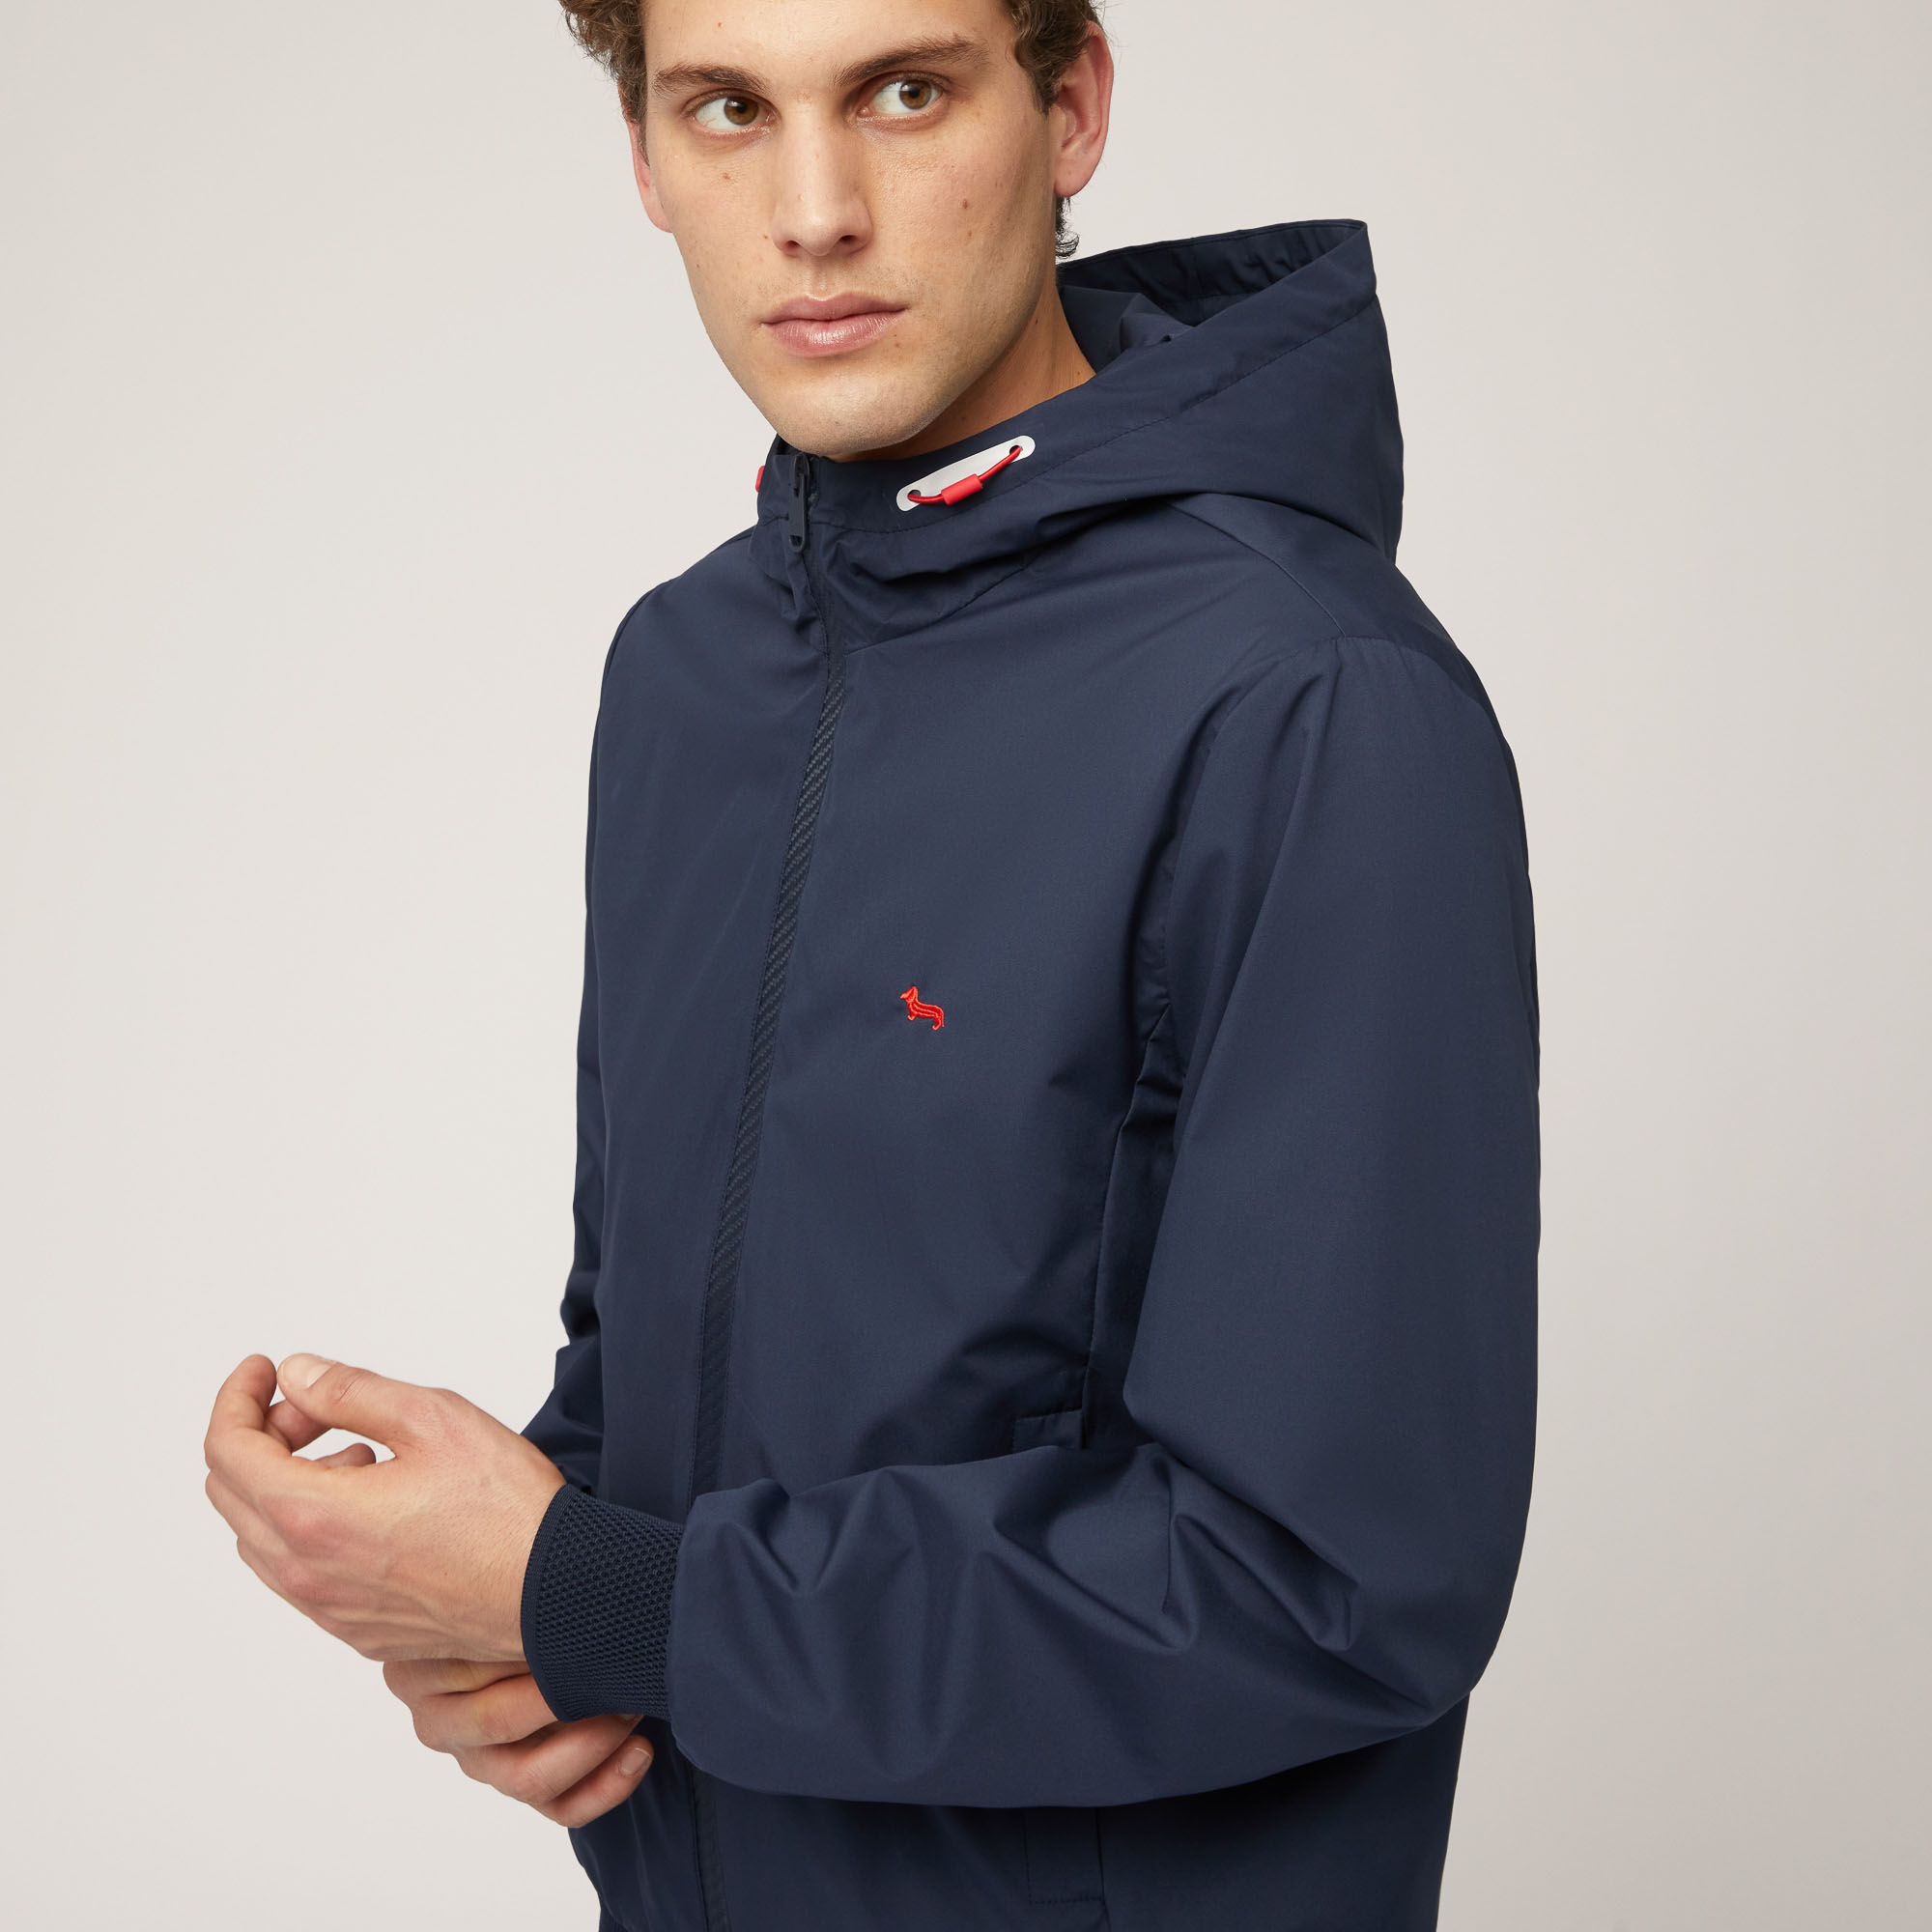 Softshell K-Way with Hood and Contrasting Details, Blue, large image number 2